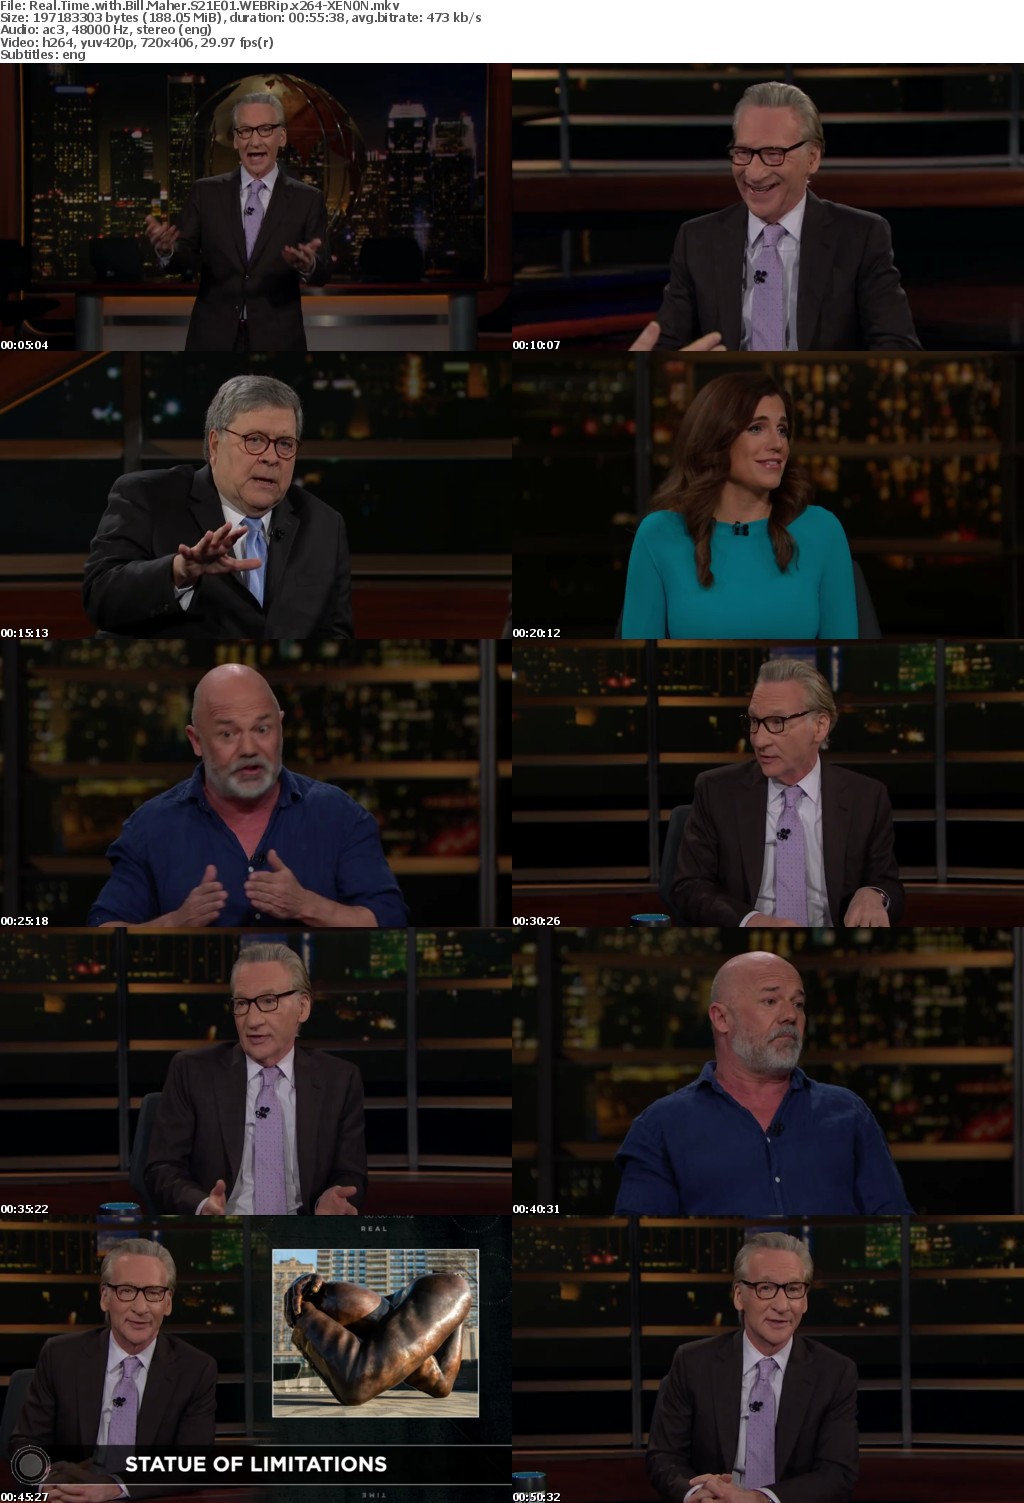 Real Time with Bill Maher S21E01 WEBRip x264-XEN0N